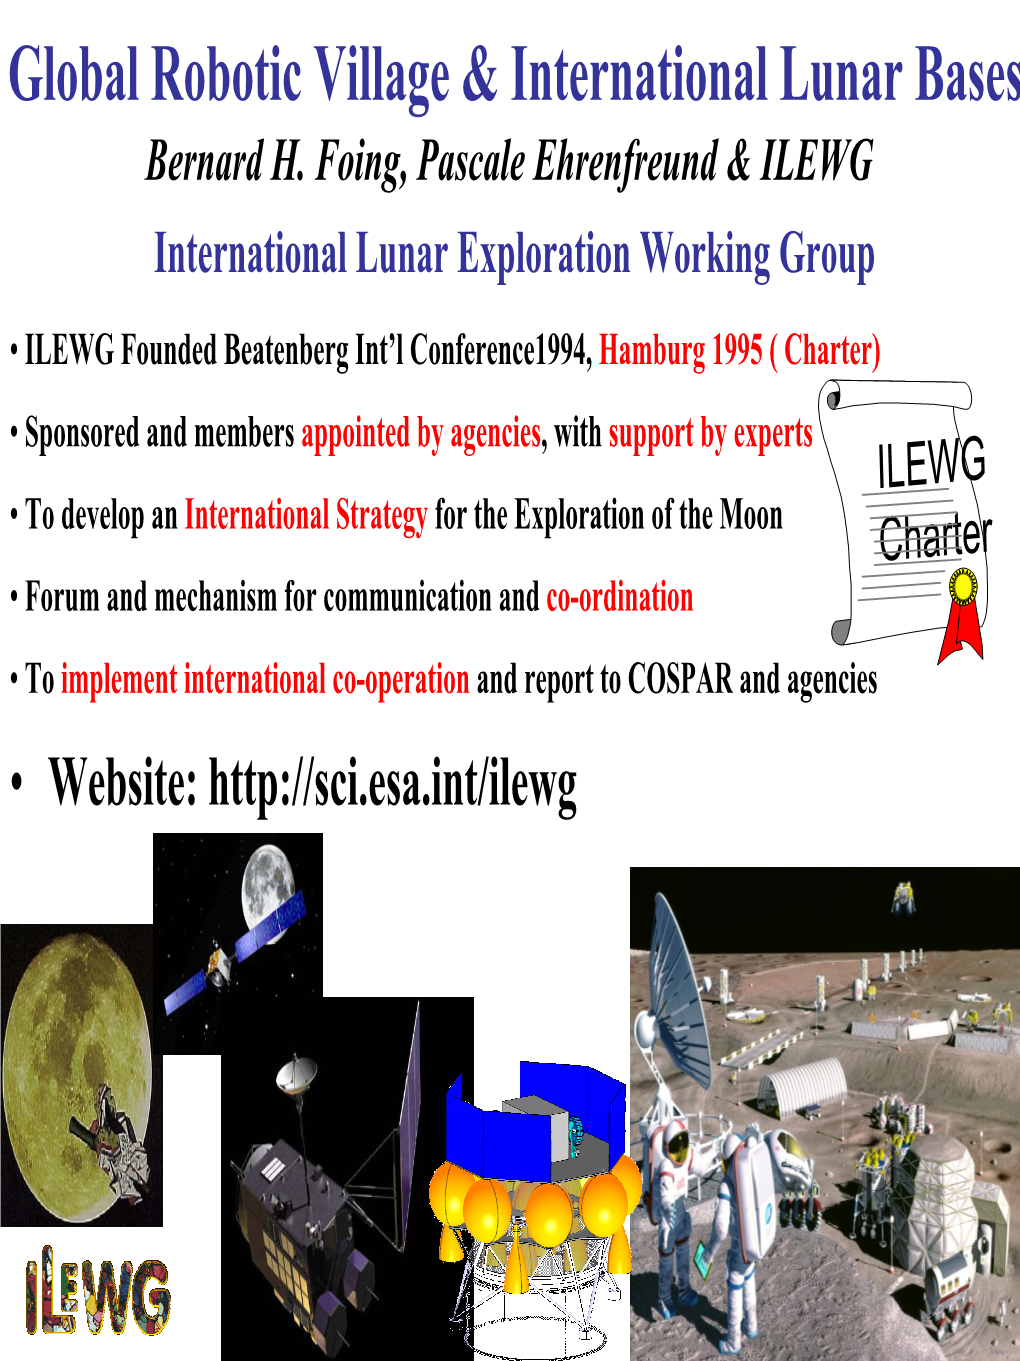 International Lunar Exploration Working Group Report from ILEWG